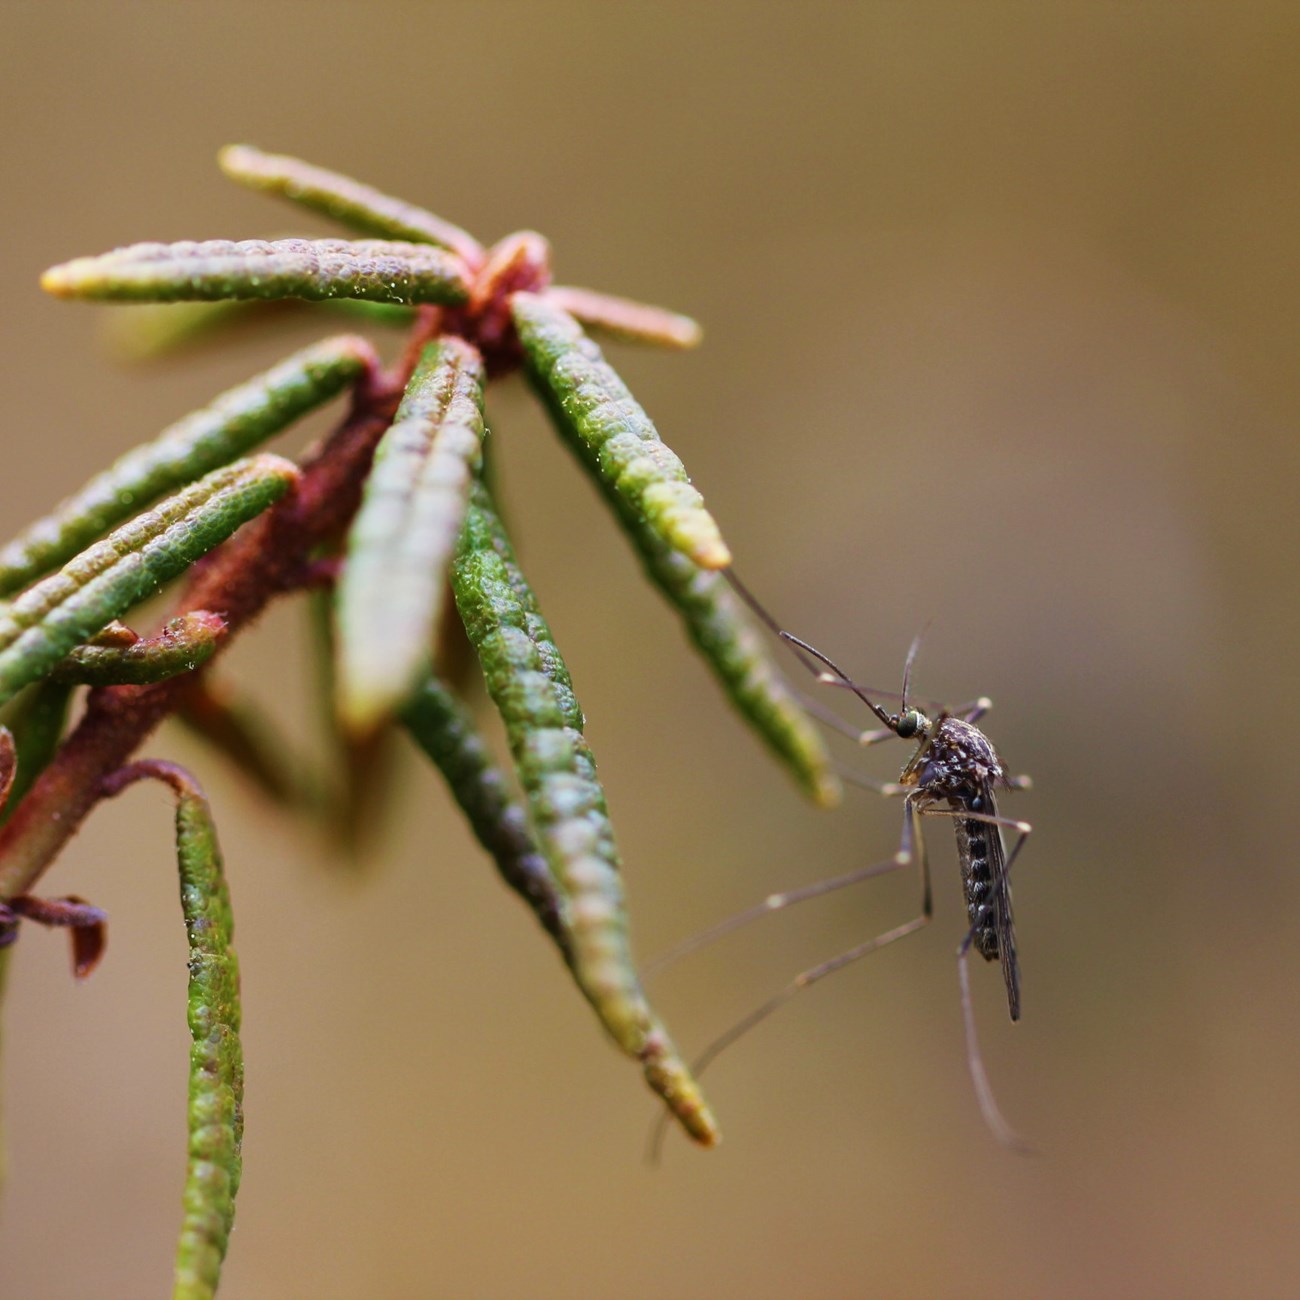 Image of a mosquito on vegetation.